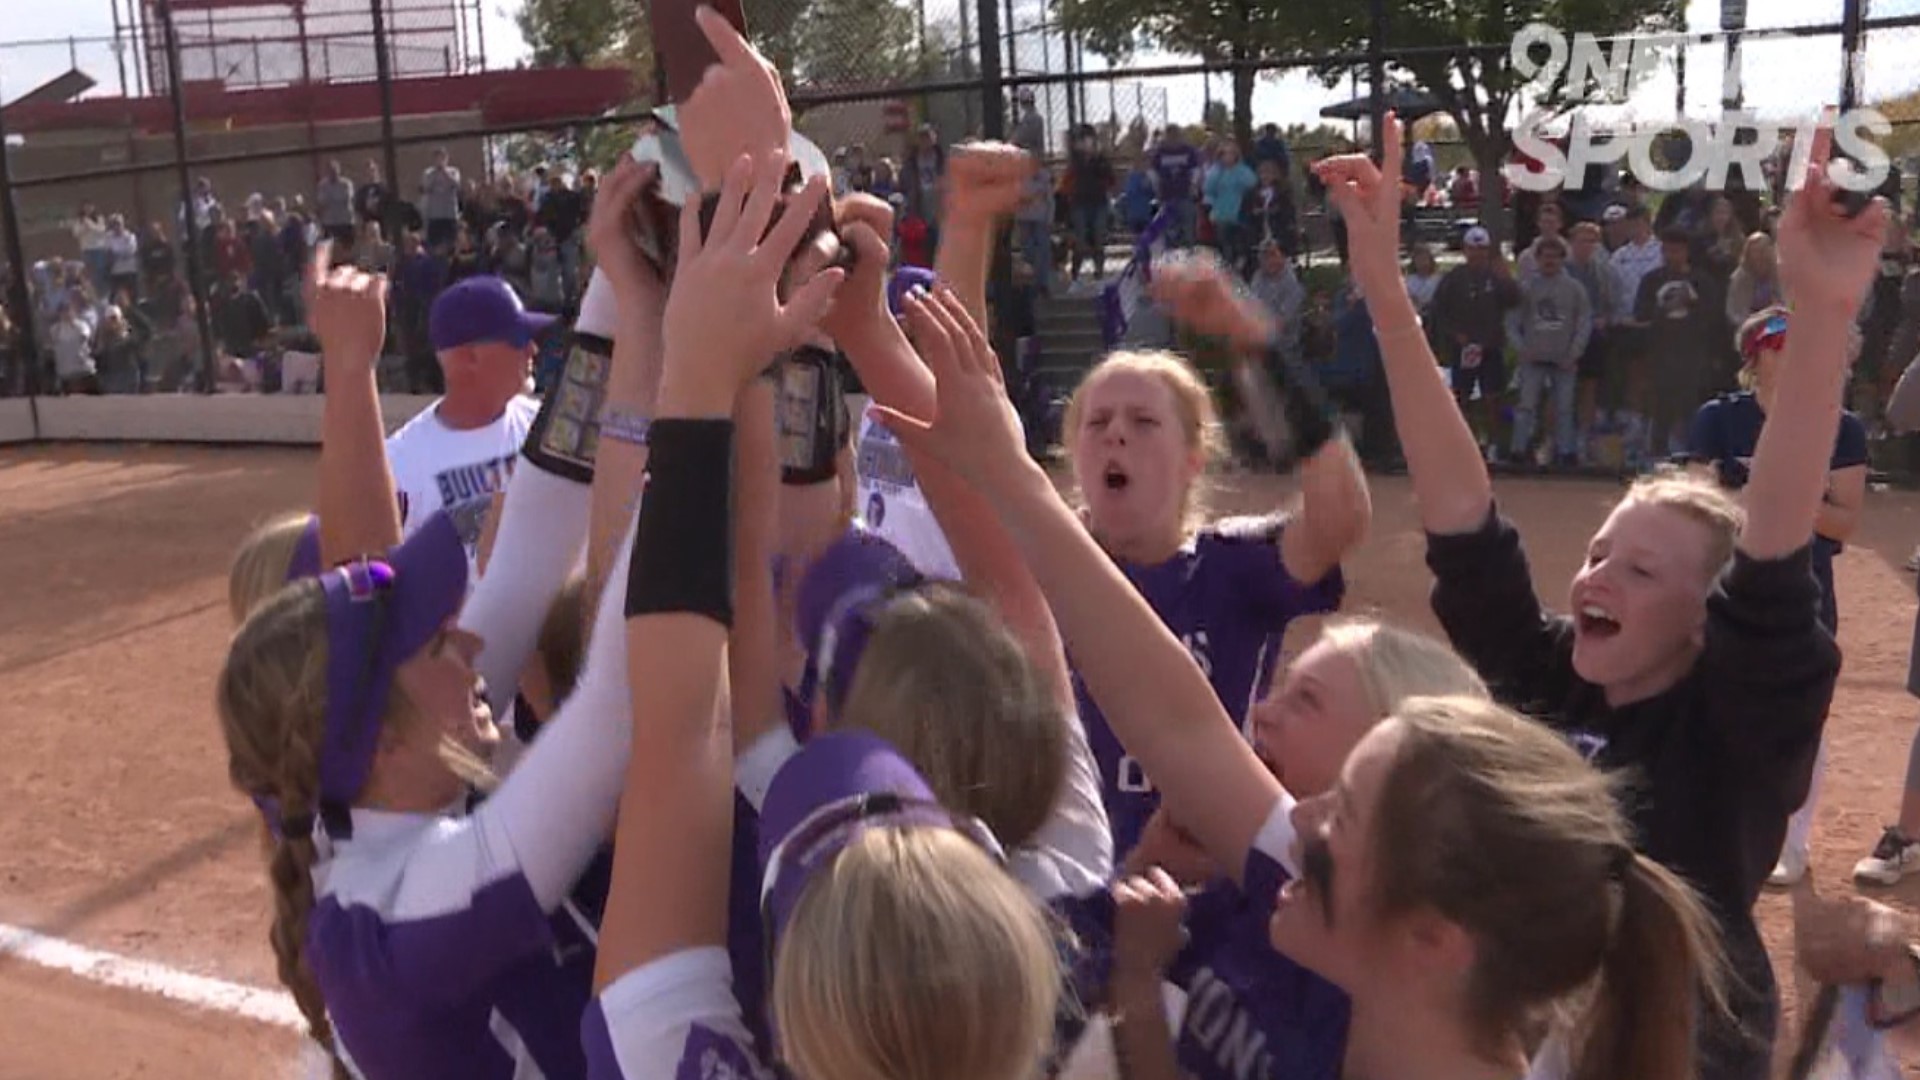 The Lions blew past University 13-2 in the Class 3A state title game.